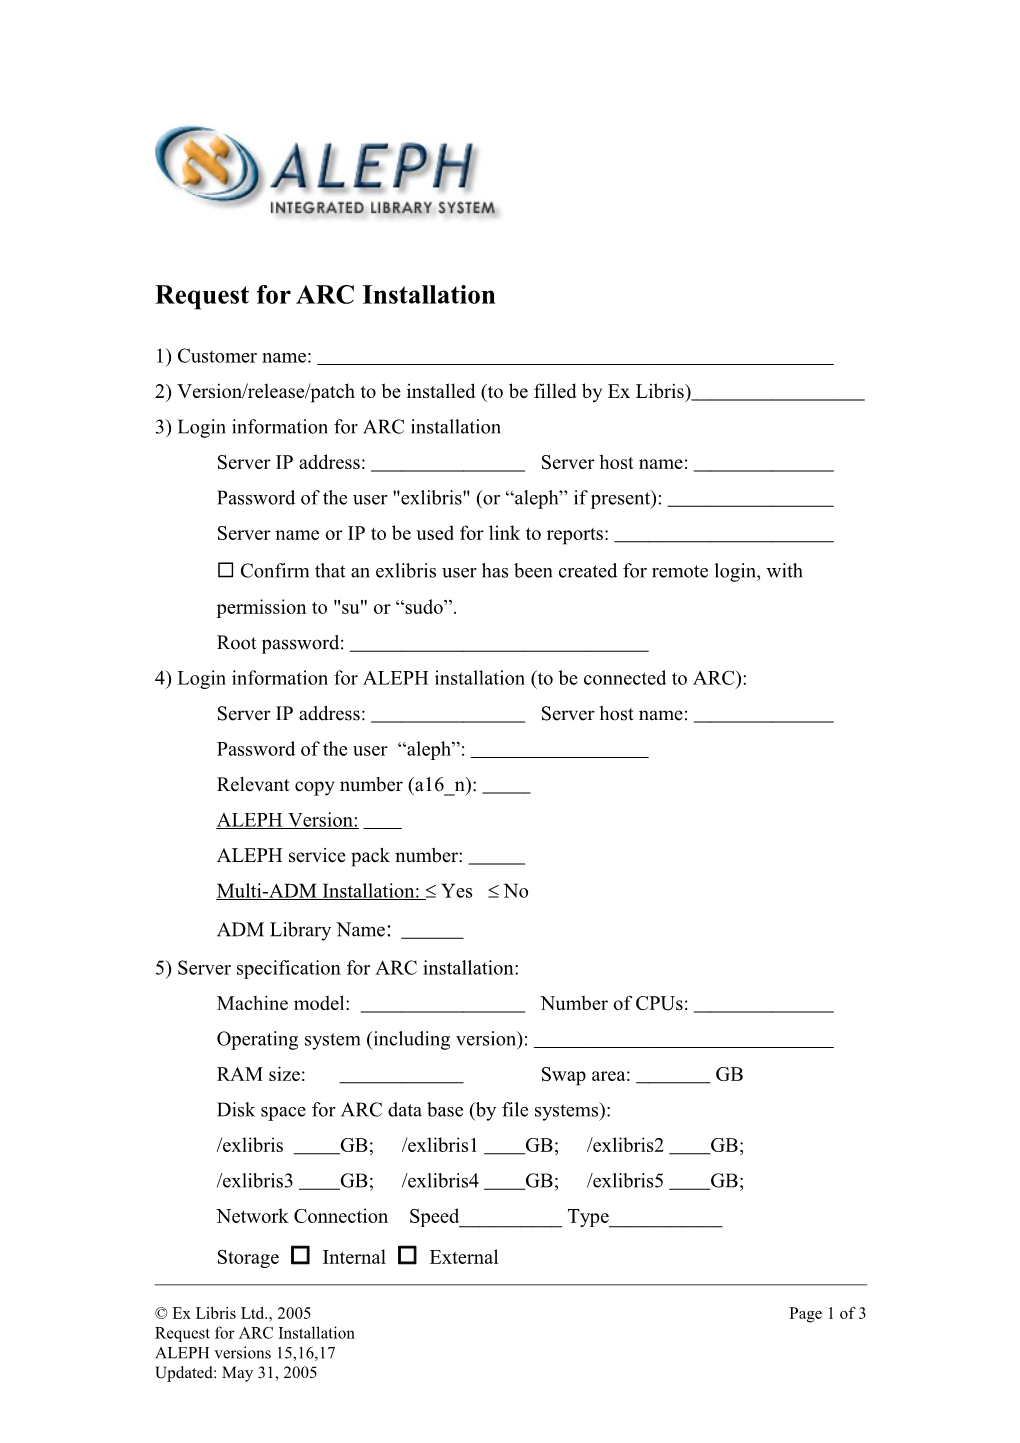 Request for ARC Installation Form